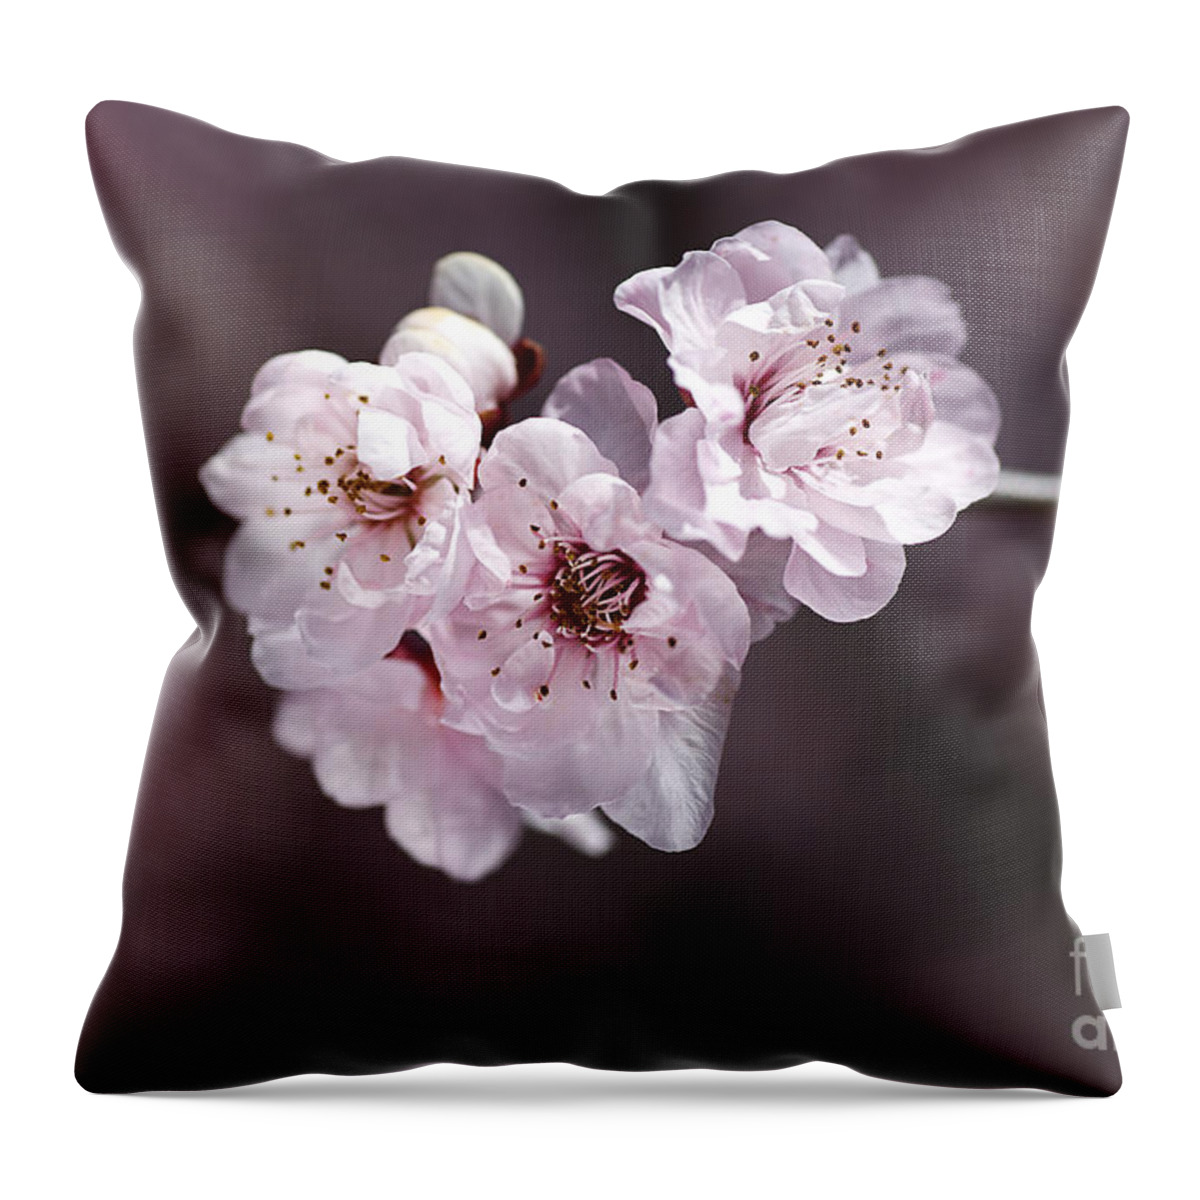 Spring Blossom Throw Pillow featuring the photograph Over A Blossom Cloud by Joy Watson